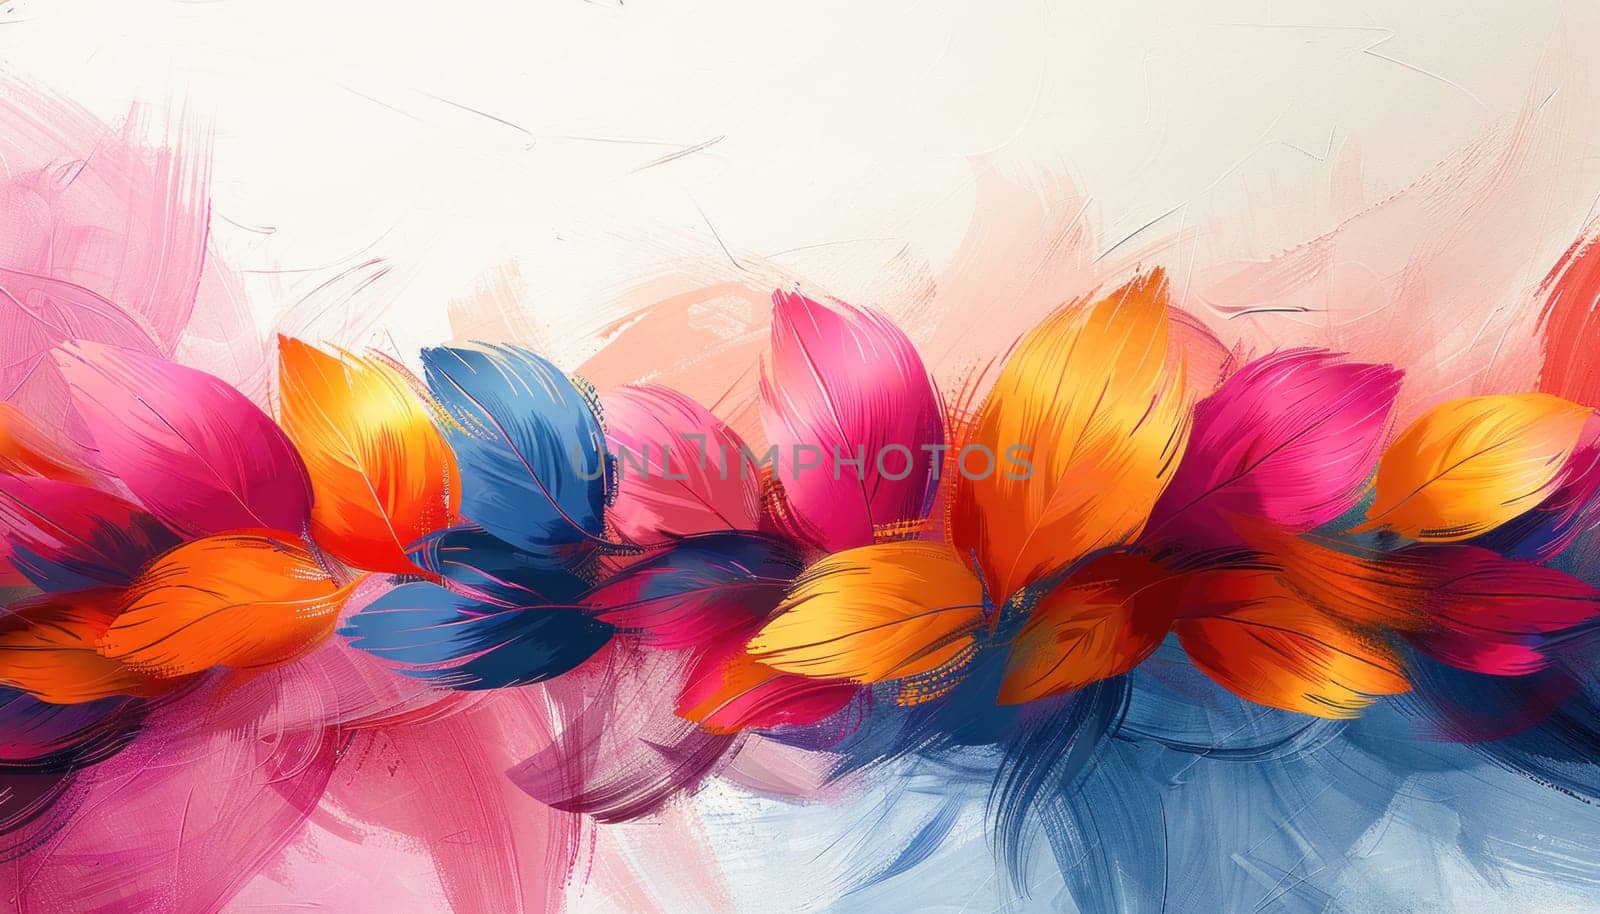 A beautiful painting featuring vibrant flowers on a simple white background, showcasing creativity and natural beauty